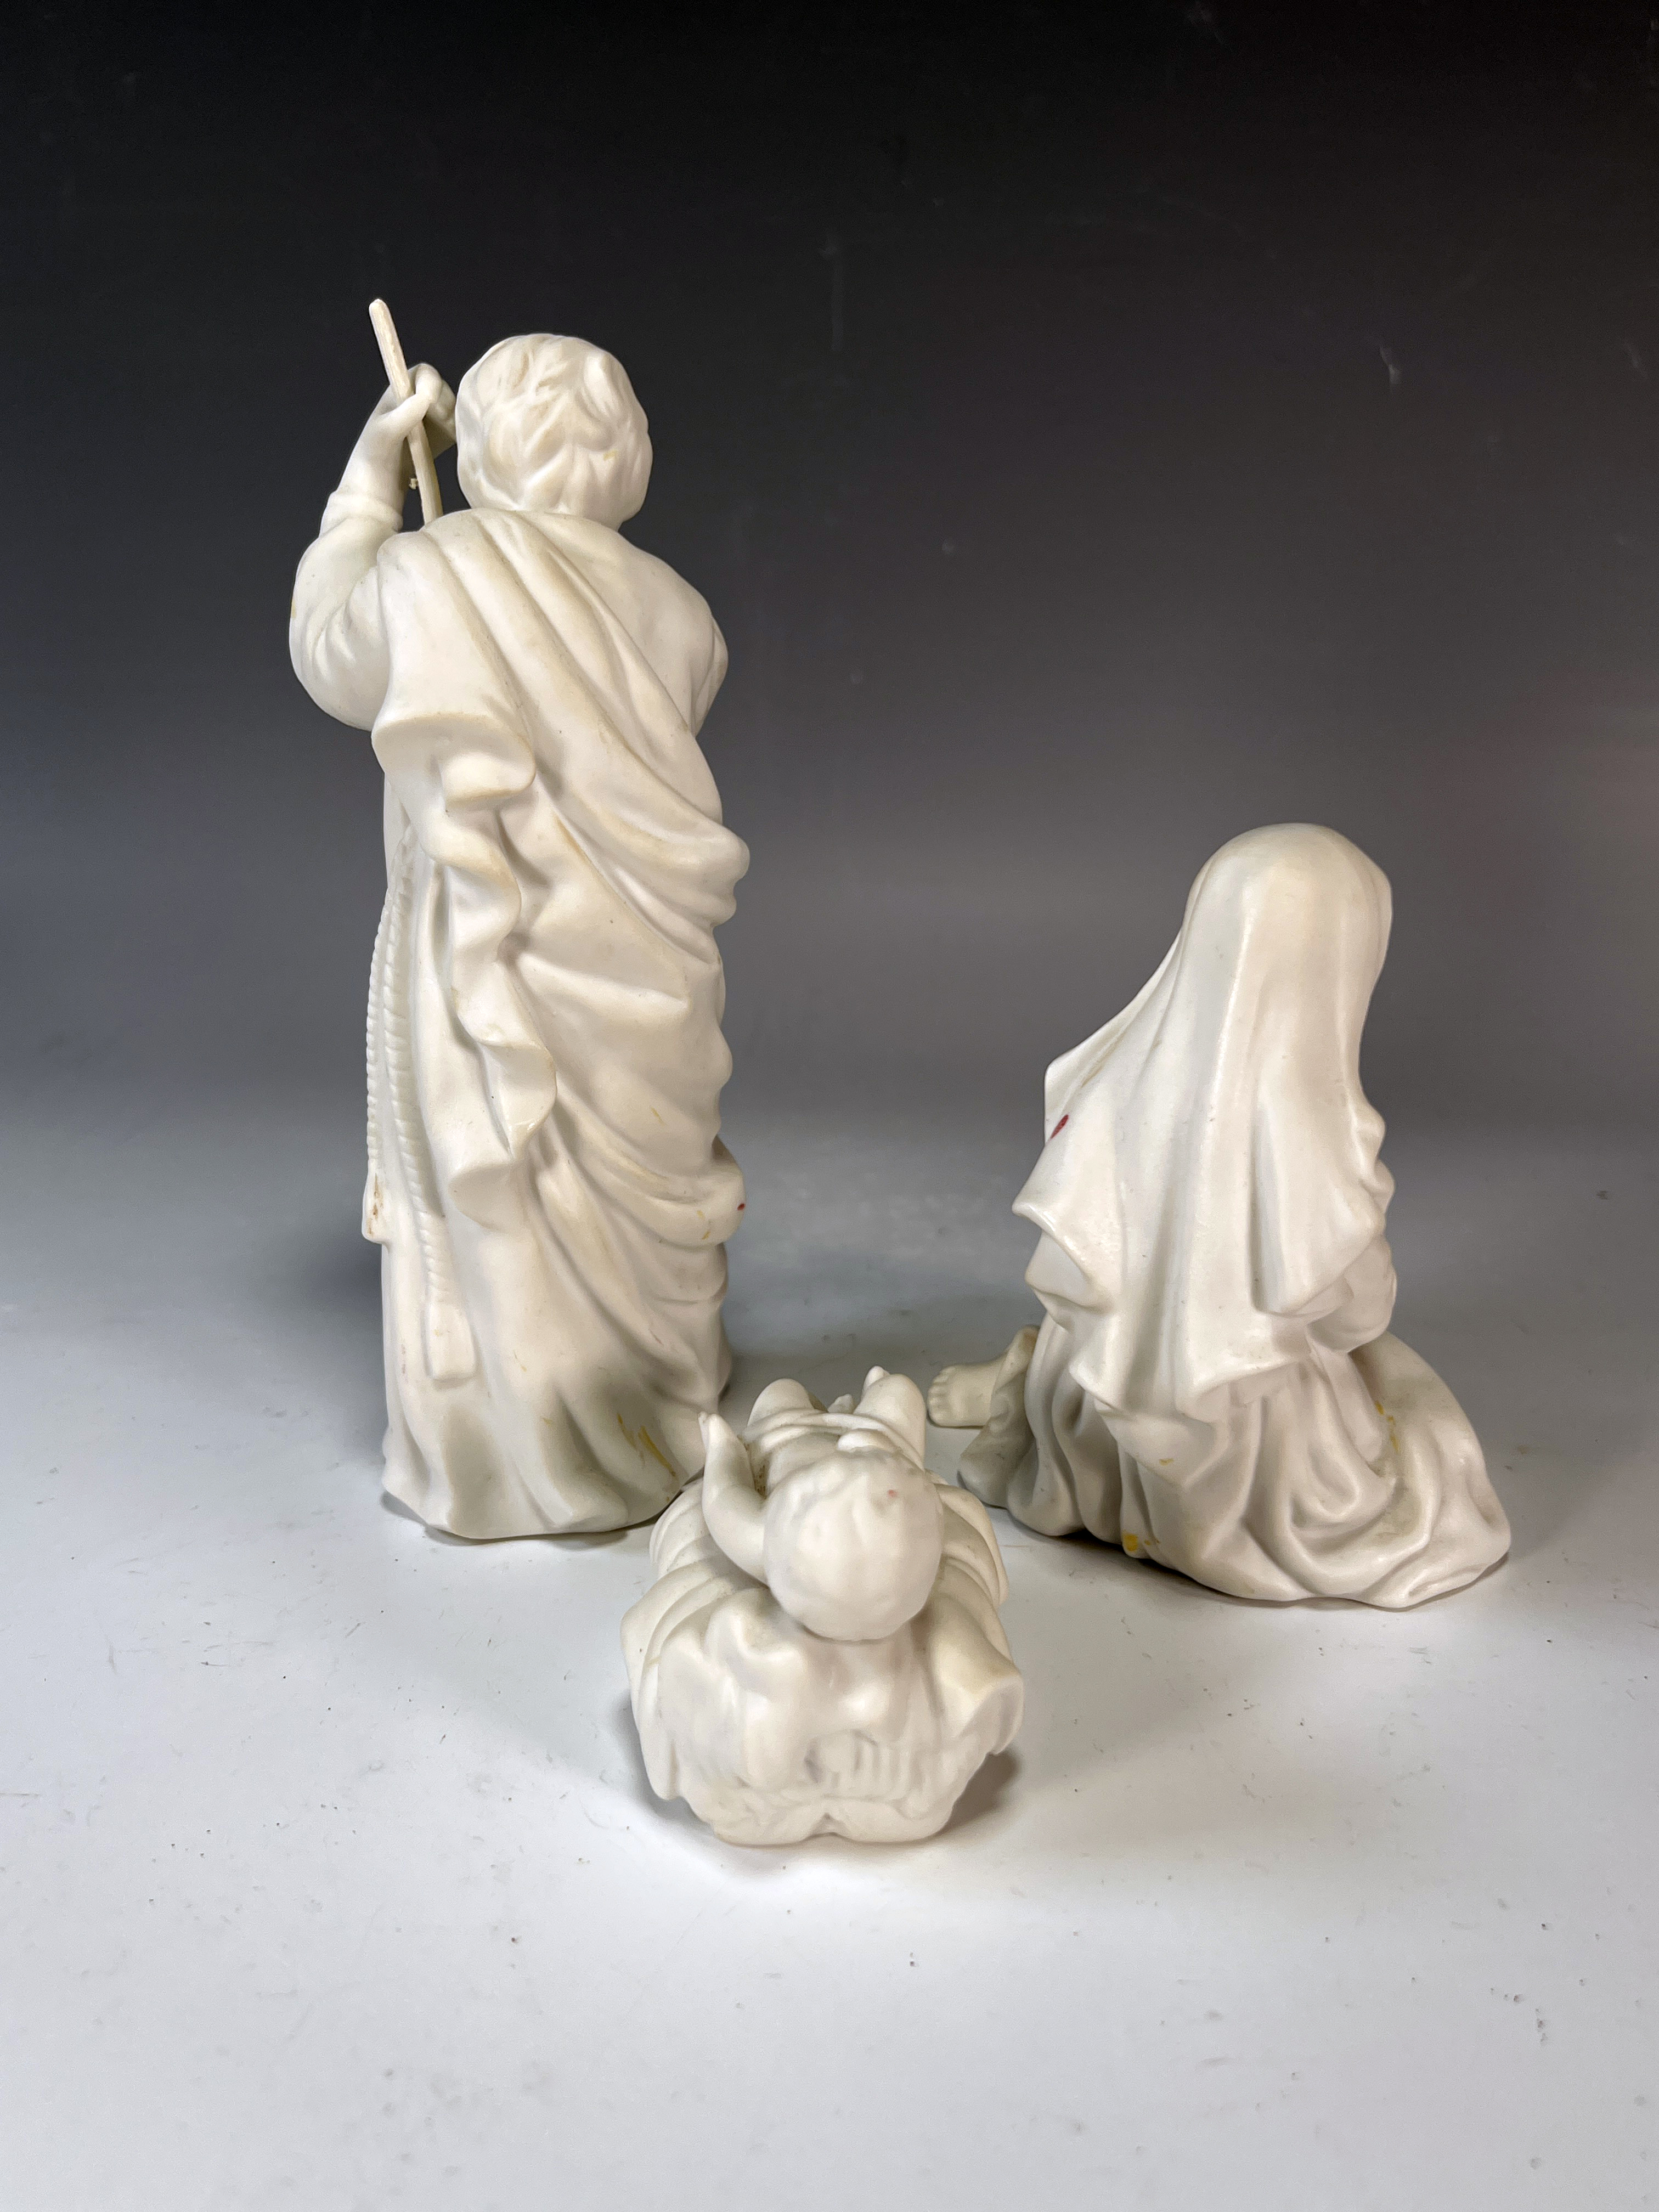 Avon Nativity Collectibles Holy Family Porcelain Figures In Box image 3